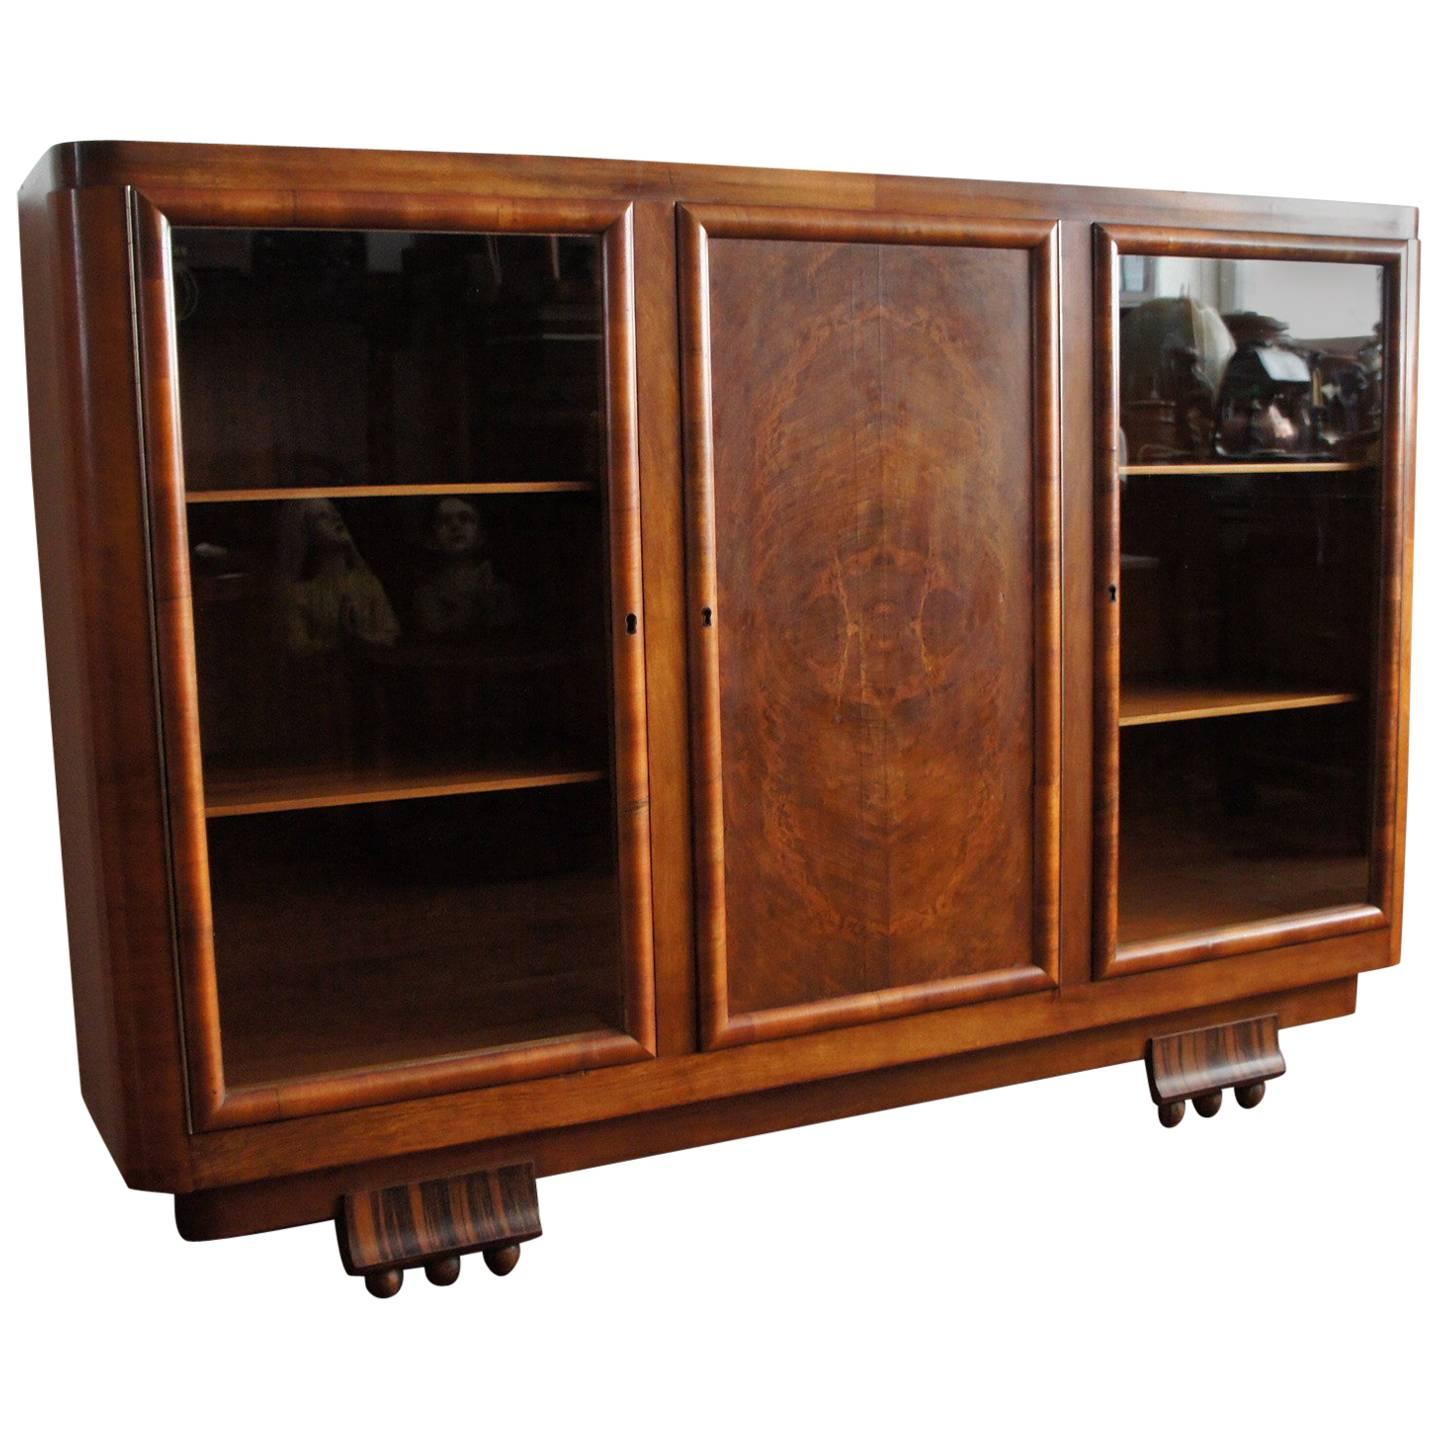 Striking 1930s Art Deco Nutwood and Macassar Ebony Bookcase and Display Cabinet